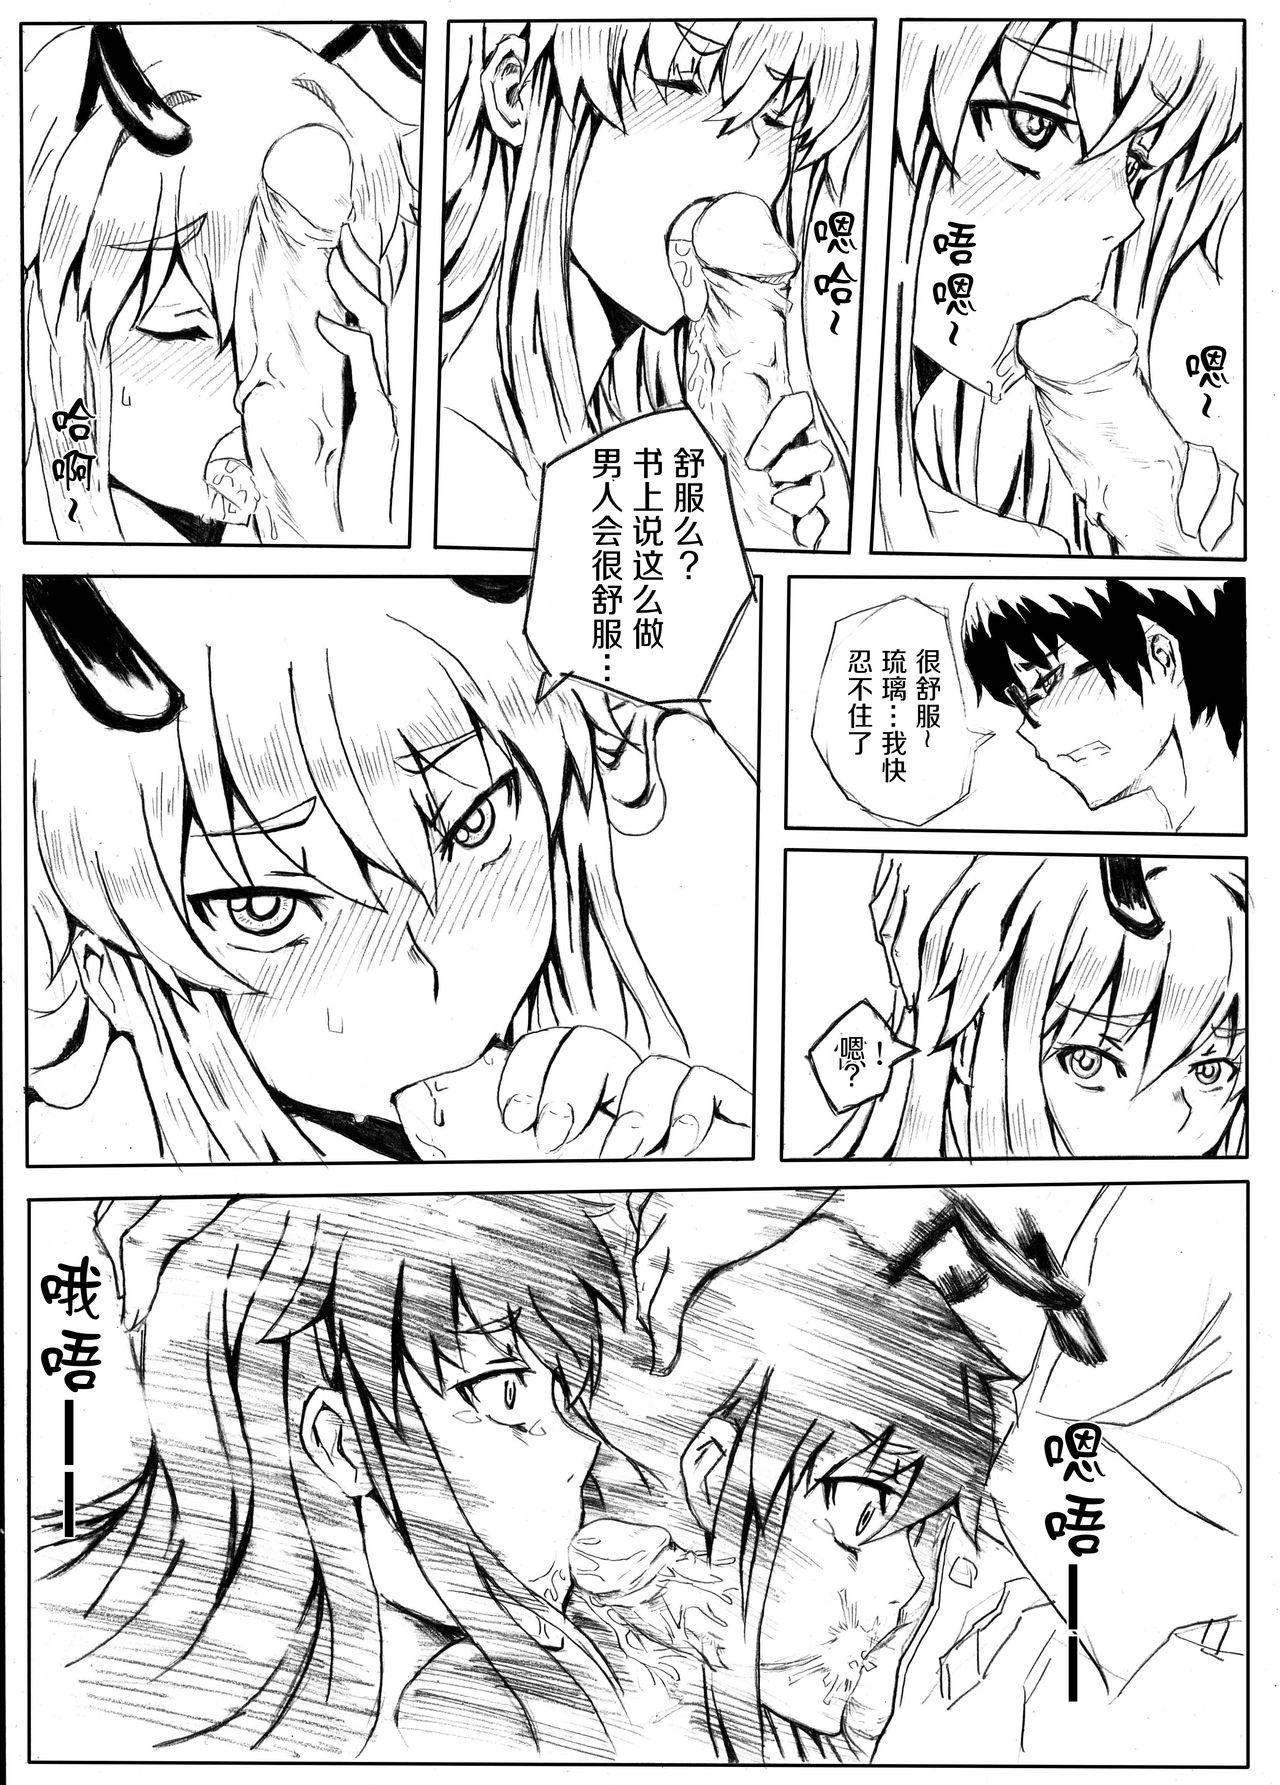 Sologirl [Shuseikan(Chinese Animation-School Shock)] Don`t Leave Me Alone 201108 [Chinese]（不想记名汉化） - School shock Holes - Page 10